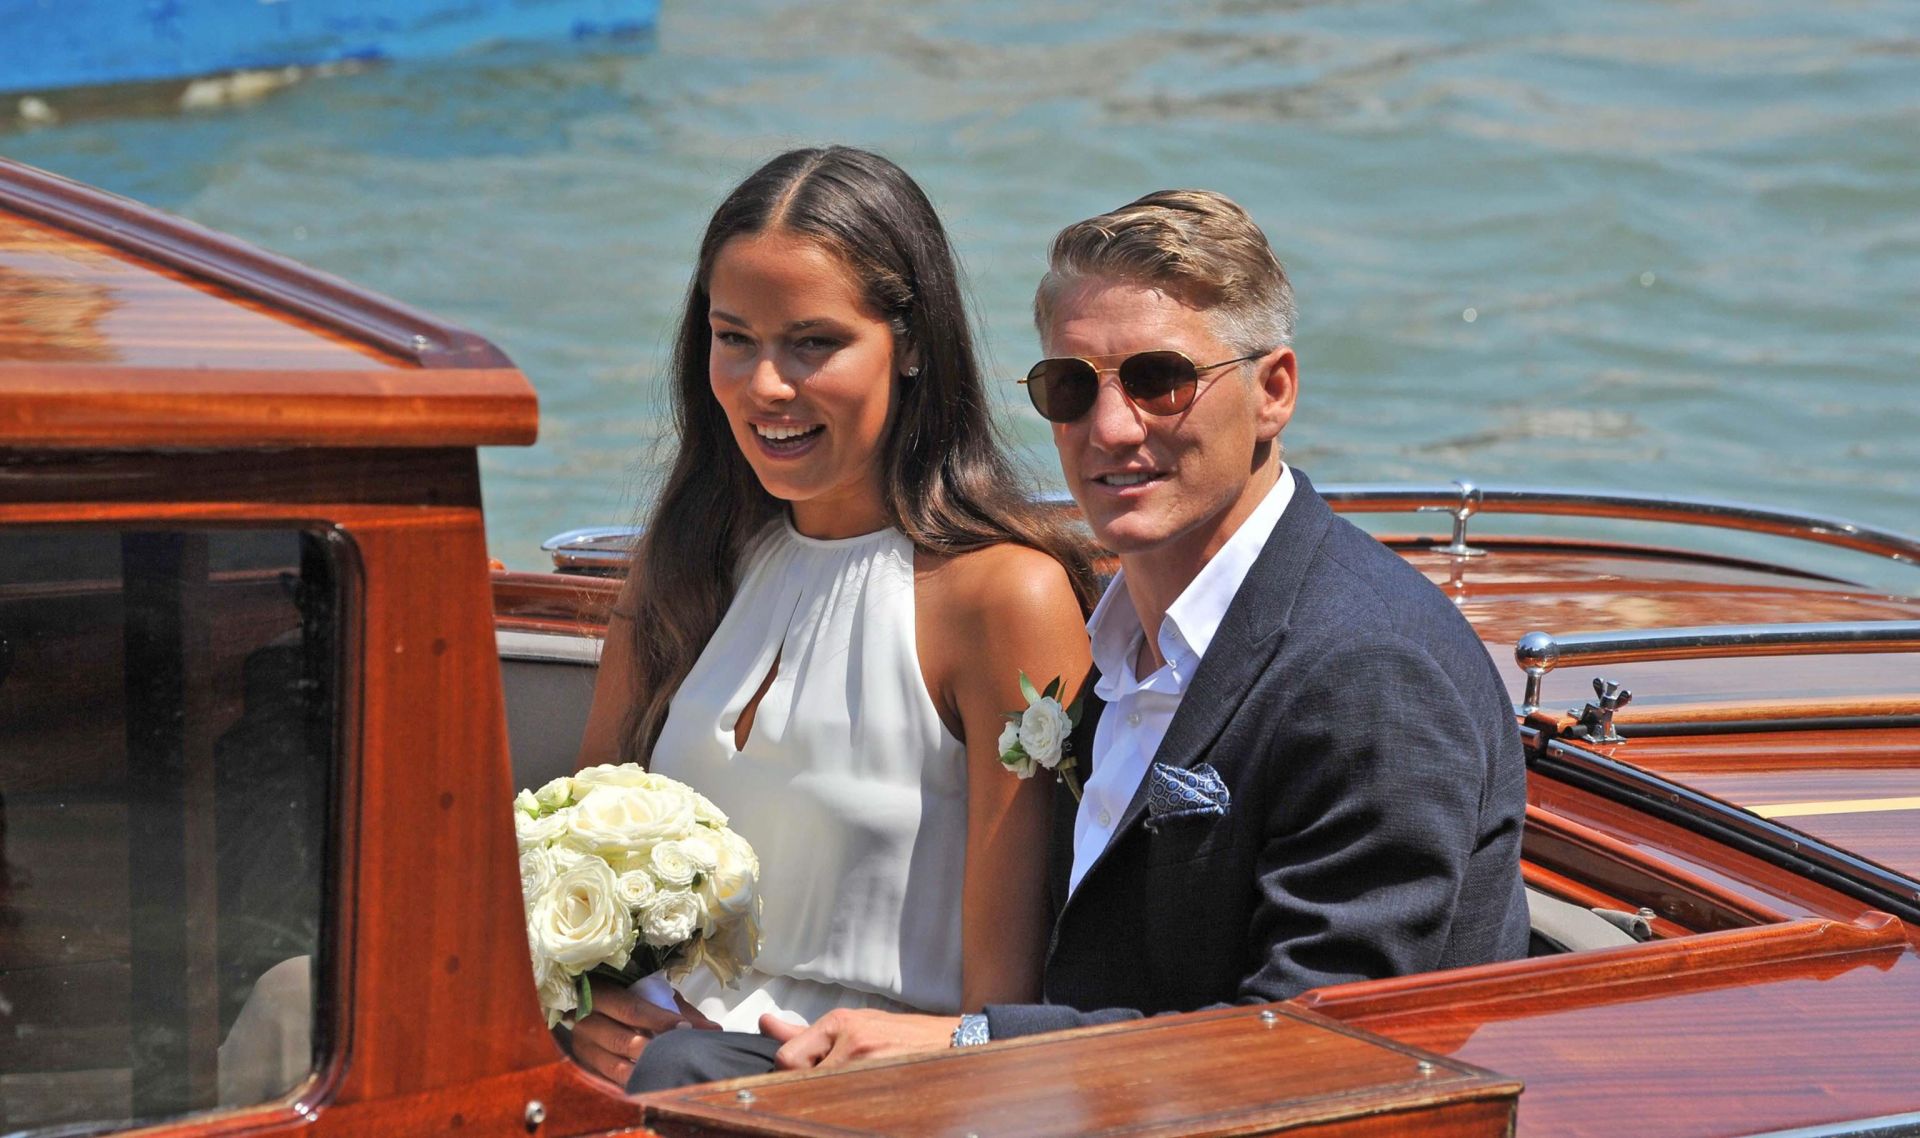 epa05421771 Serbian tennis player Ana Ivanovic and German soccer player Bastian Schweinsteiger sit on a boat after their wedding in Venice, Italy, 12 July 2016. Schweinsteiger plays as a midfielder for English club Manchester United and in the Germany national team.  EPA/ANDREA MEROLA